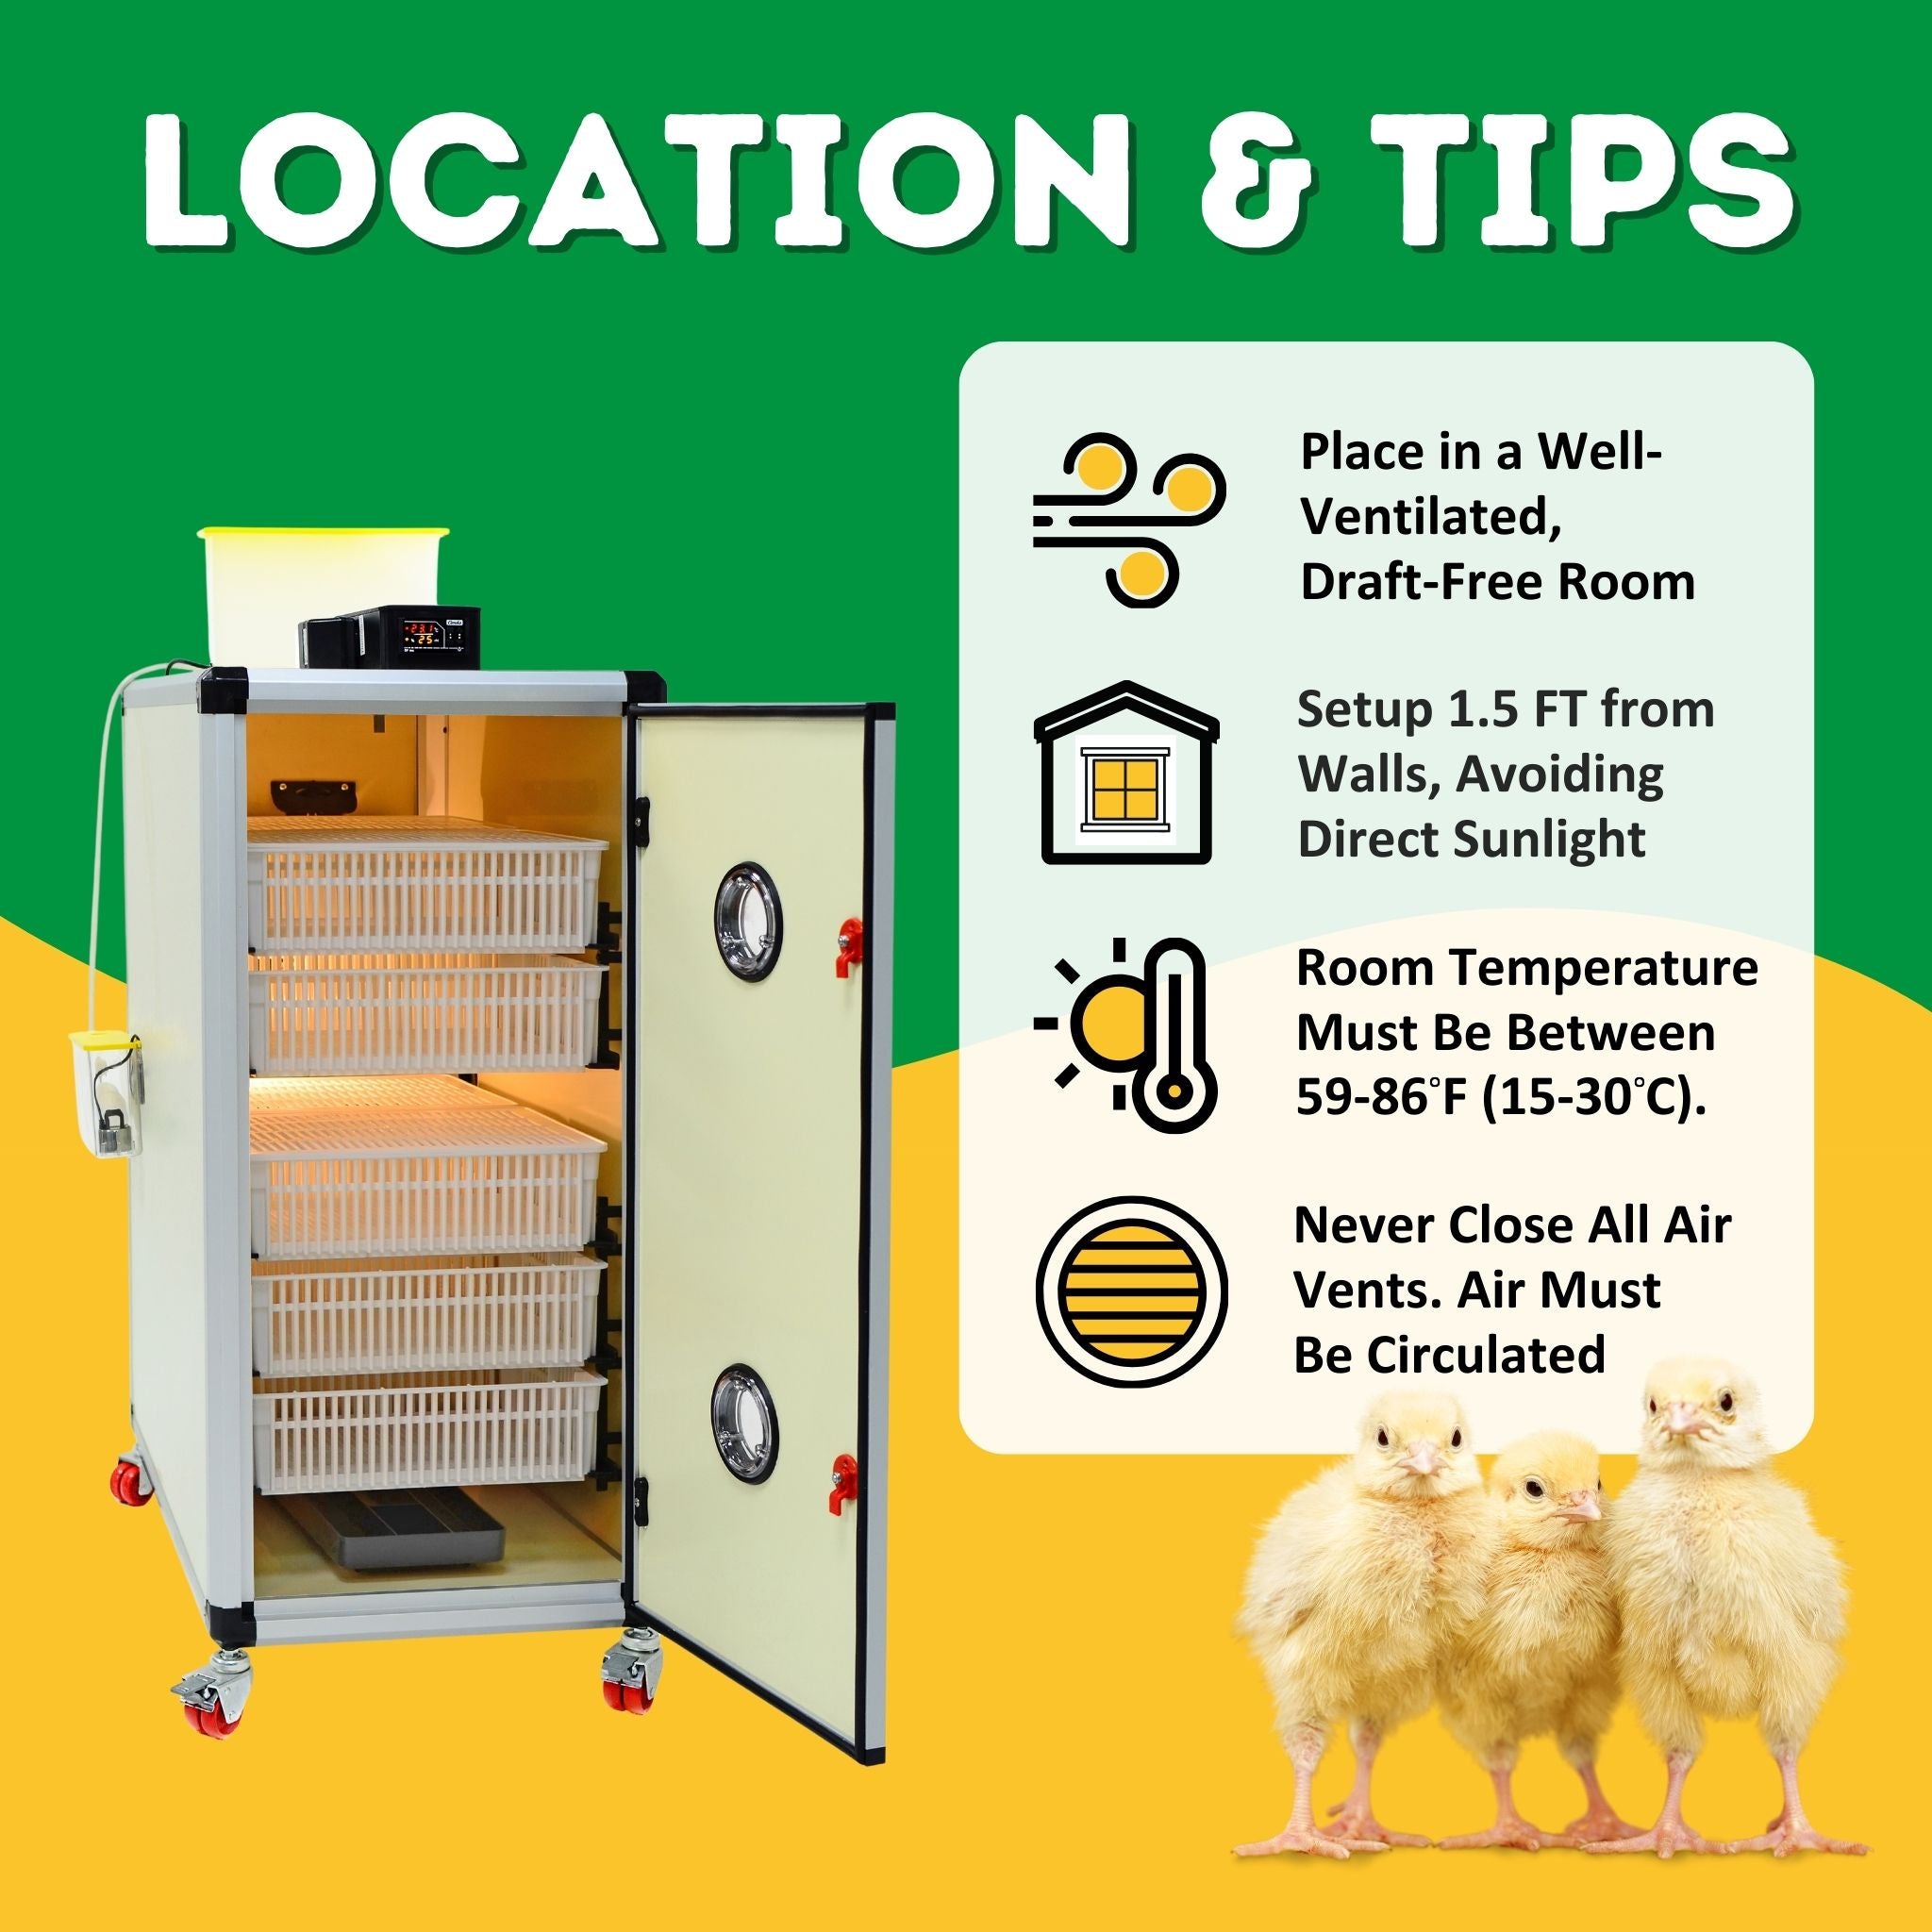 Hatching Time Cimuka. Image shows tips for where to keep incubator. Draft-free room at least 1.5 ft away from walls with a room temp between 59 and 86 degrees Fahrenheit. Image shows incubator and chicks.